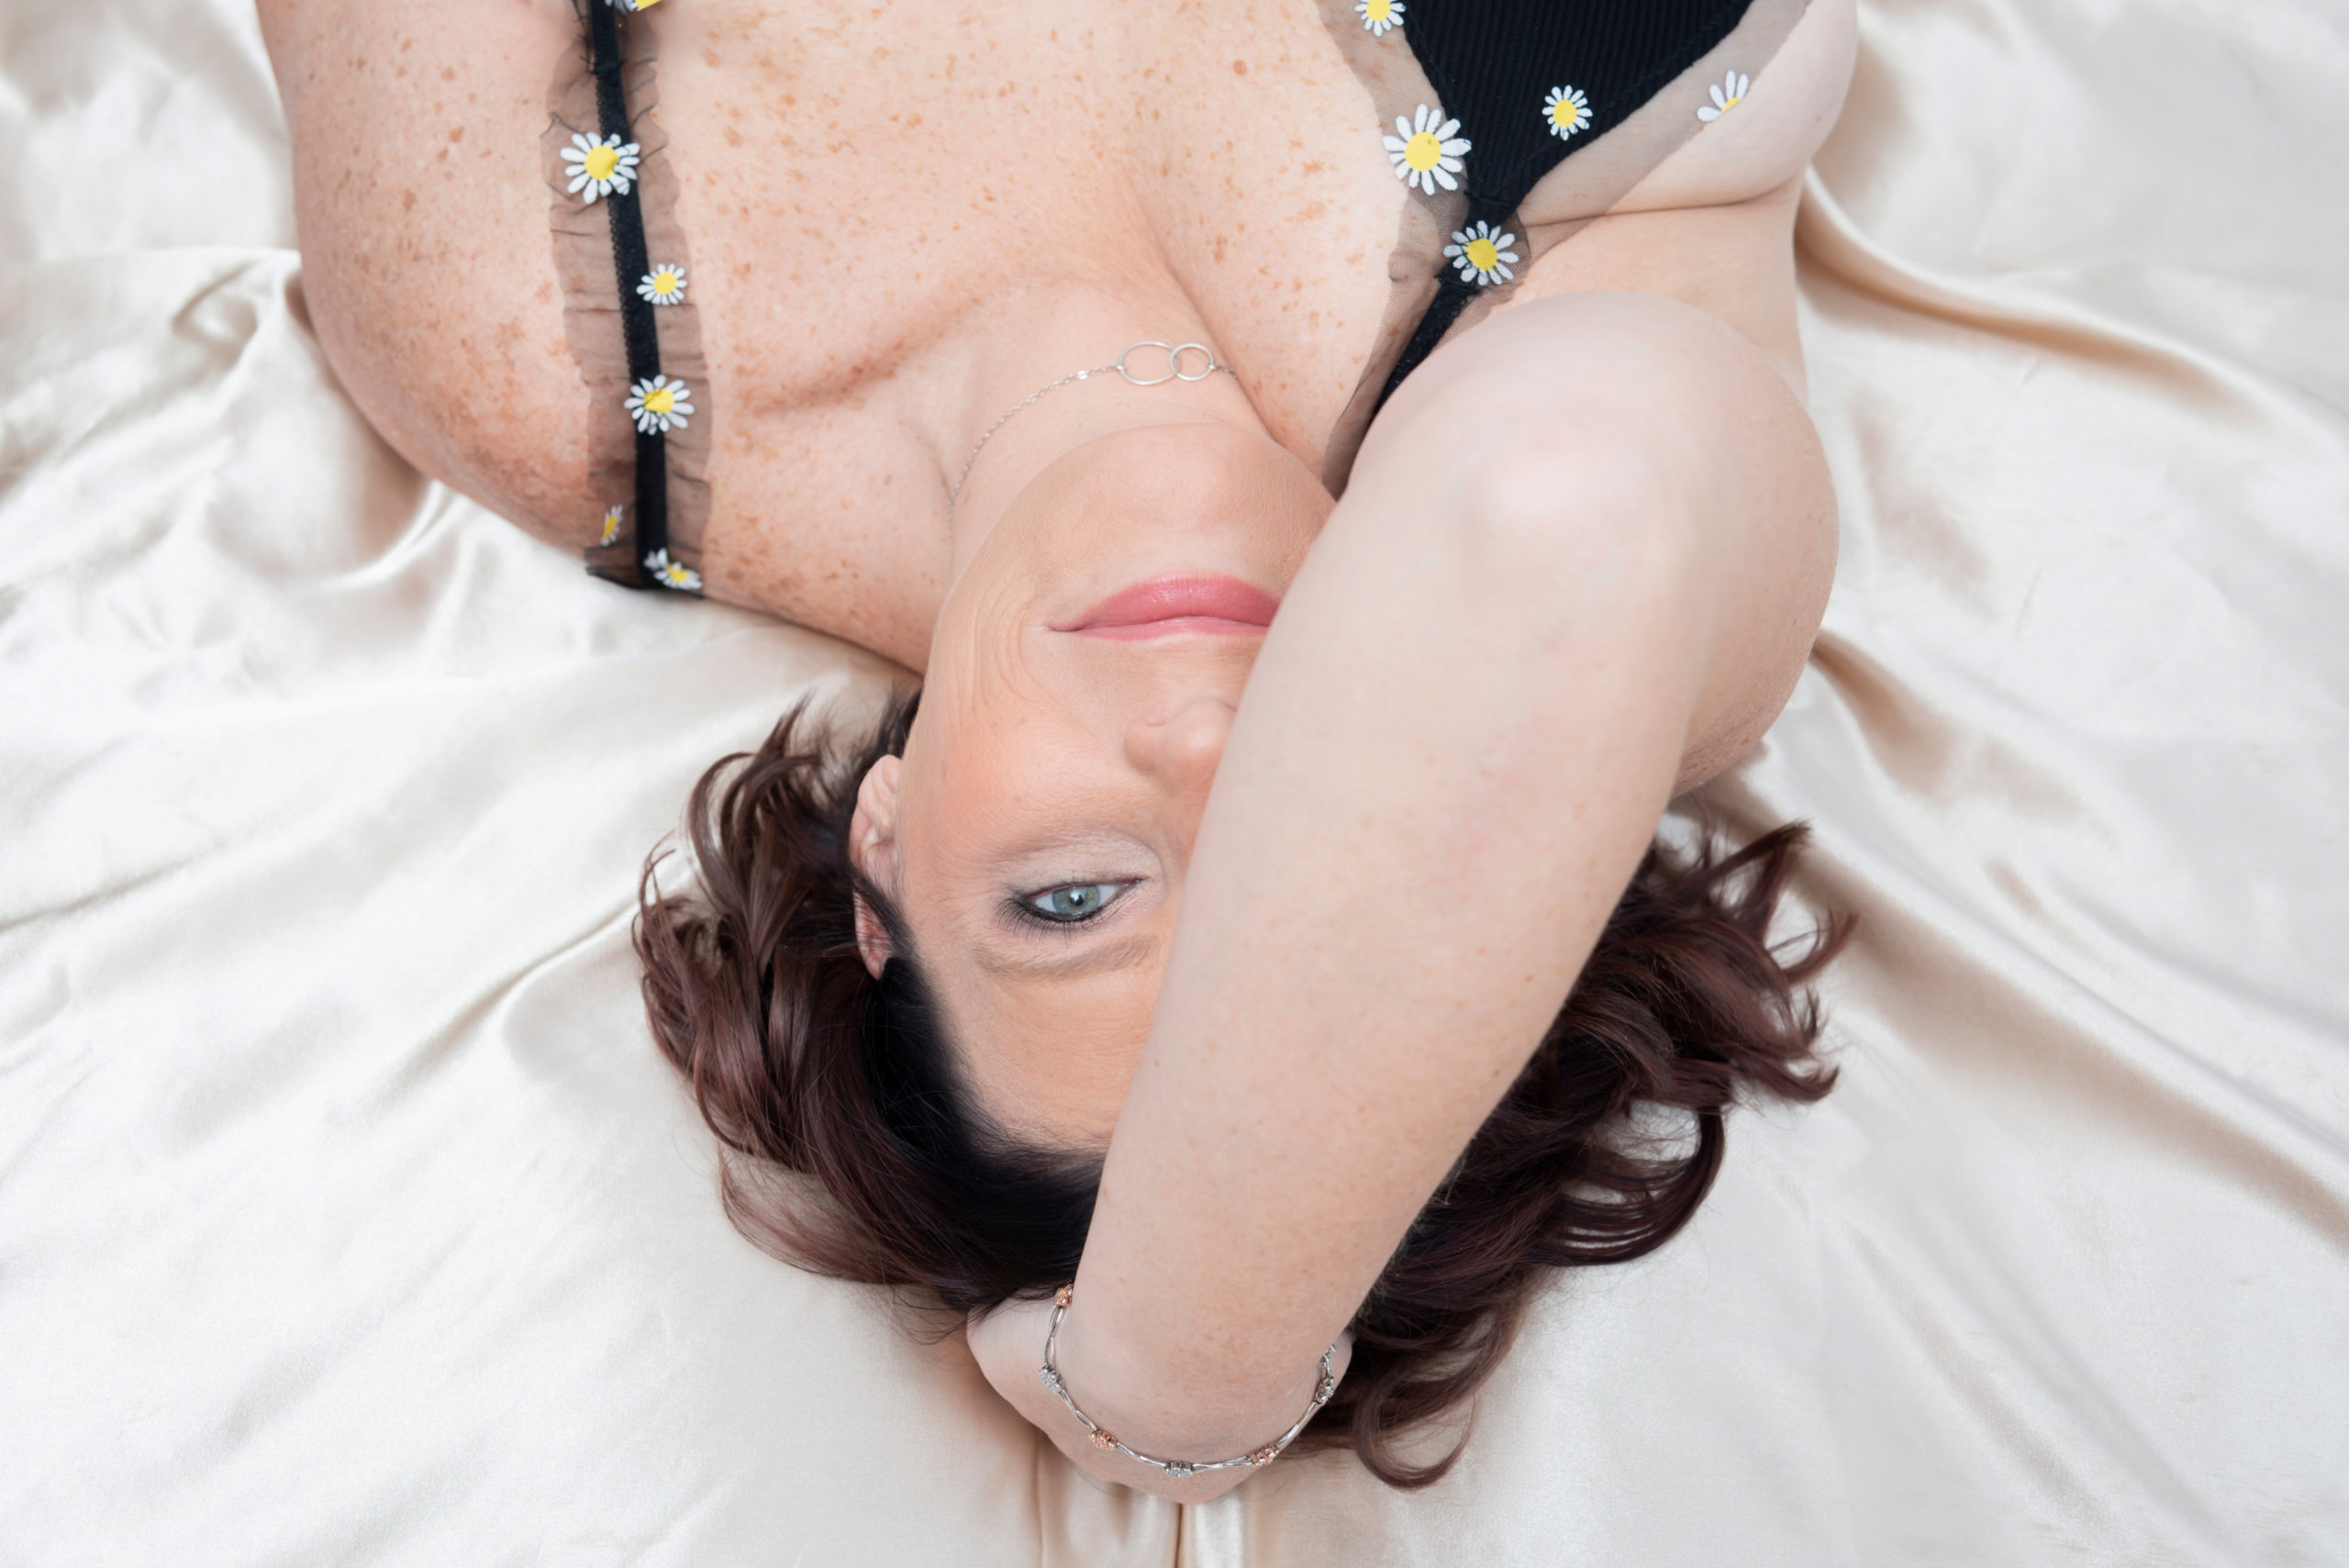 A woman covers half her face with her arm while looking into the camera during her boudoir photo shoot.